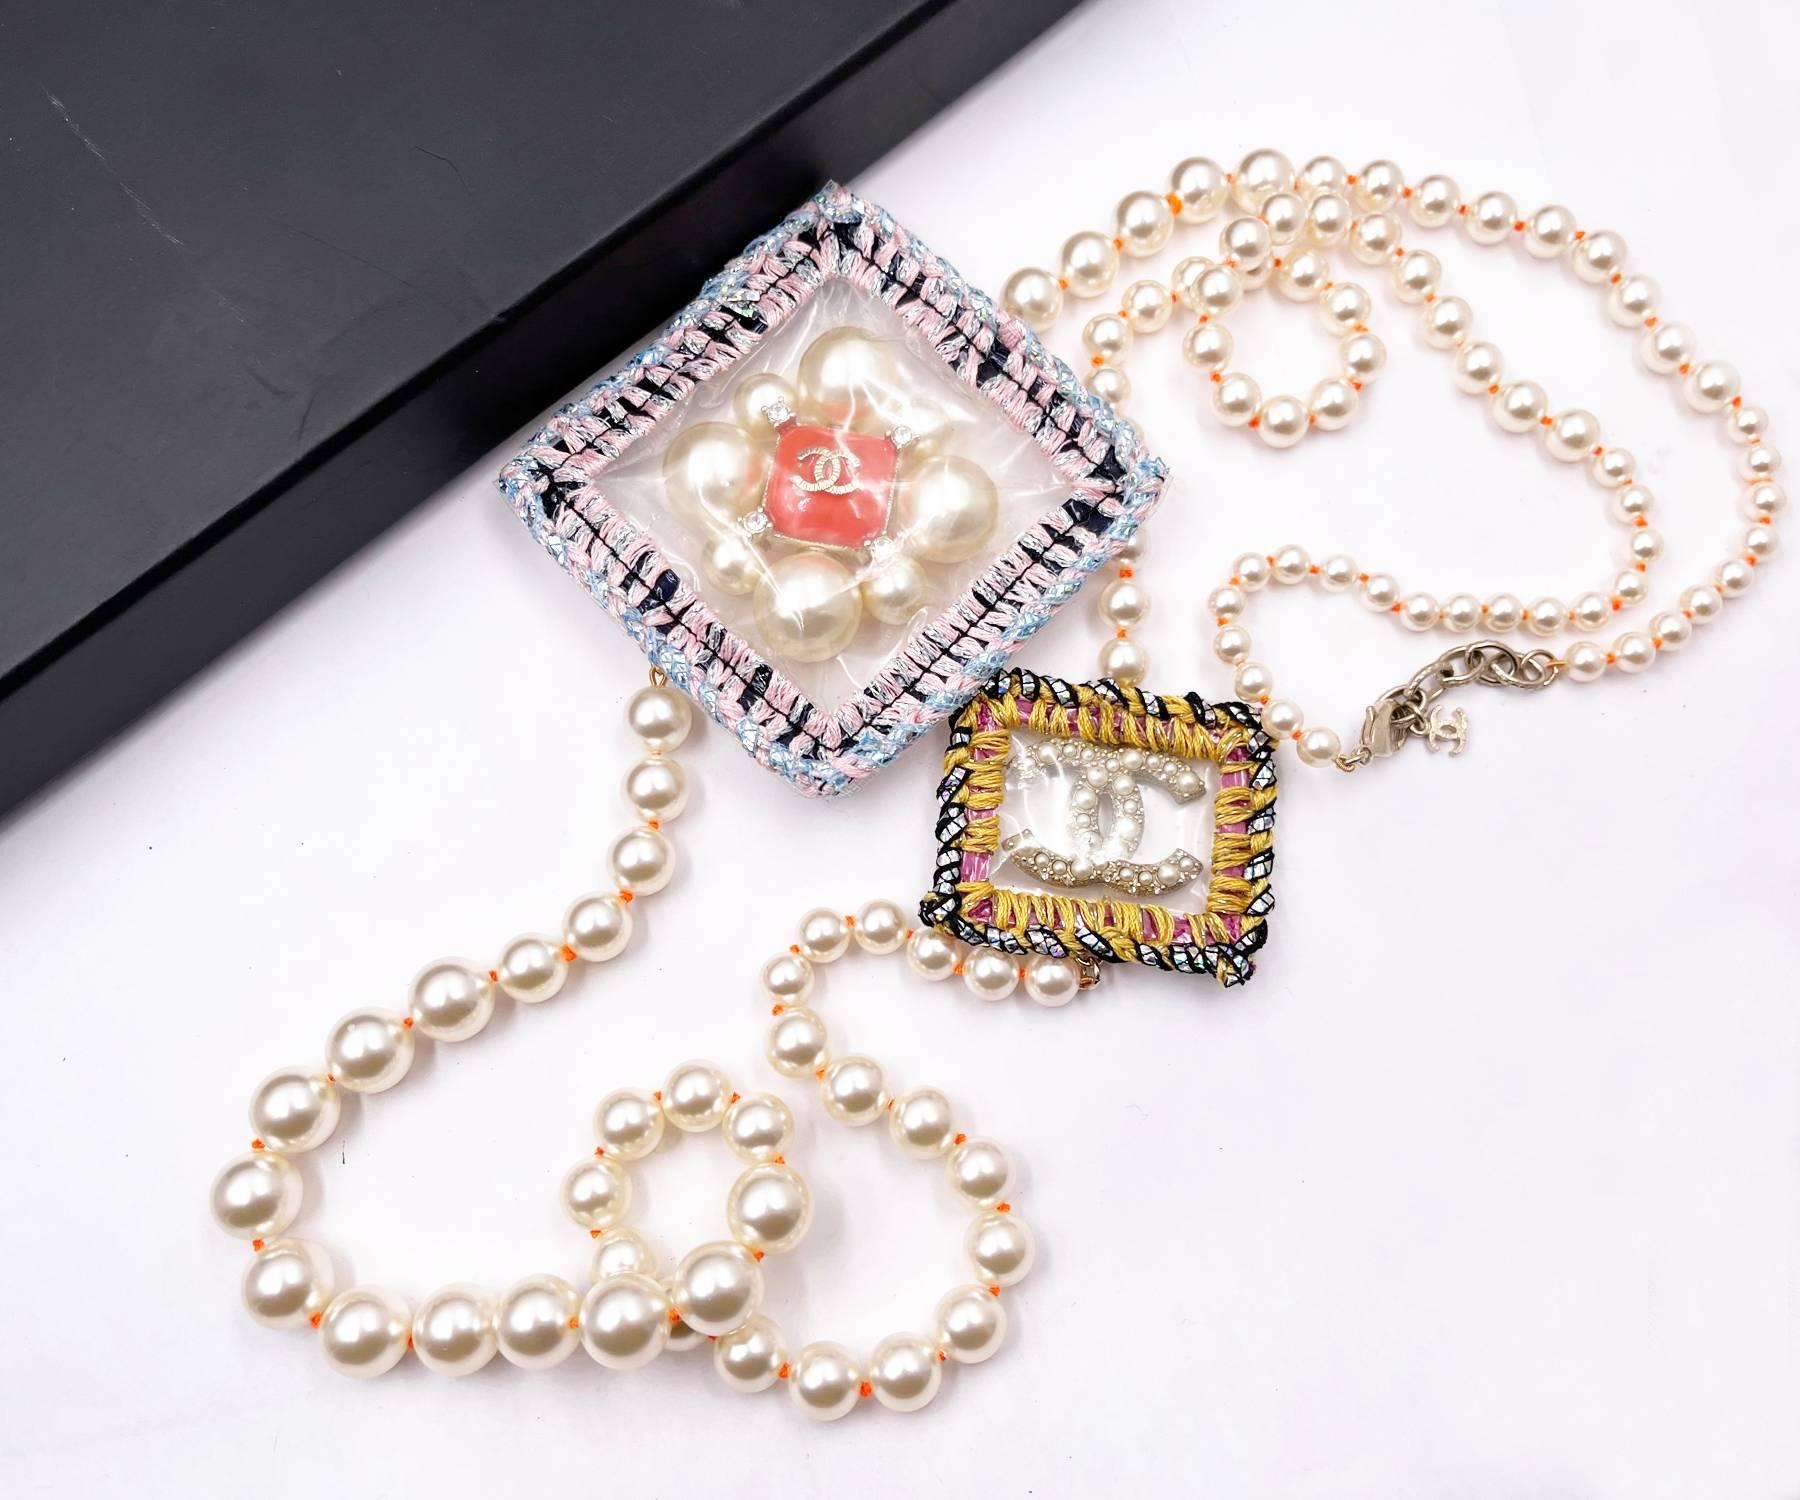 Chanel Super Rare Runway Gold CC Neon Patchwork Pearl Necklace As Seen on Kremi Otashliyska

*Marked 14
*Made in France
*Comes with the original box
*As seen on Kremi Otashliyska on Runway.

-The pendants are approximately 3″ x 3″ and 2″ x